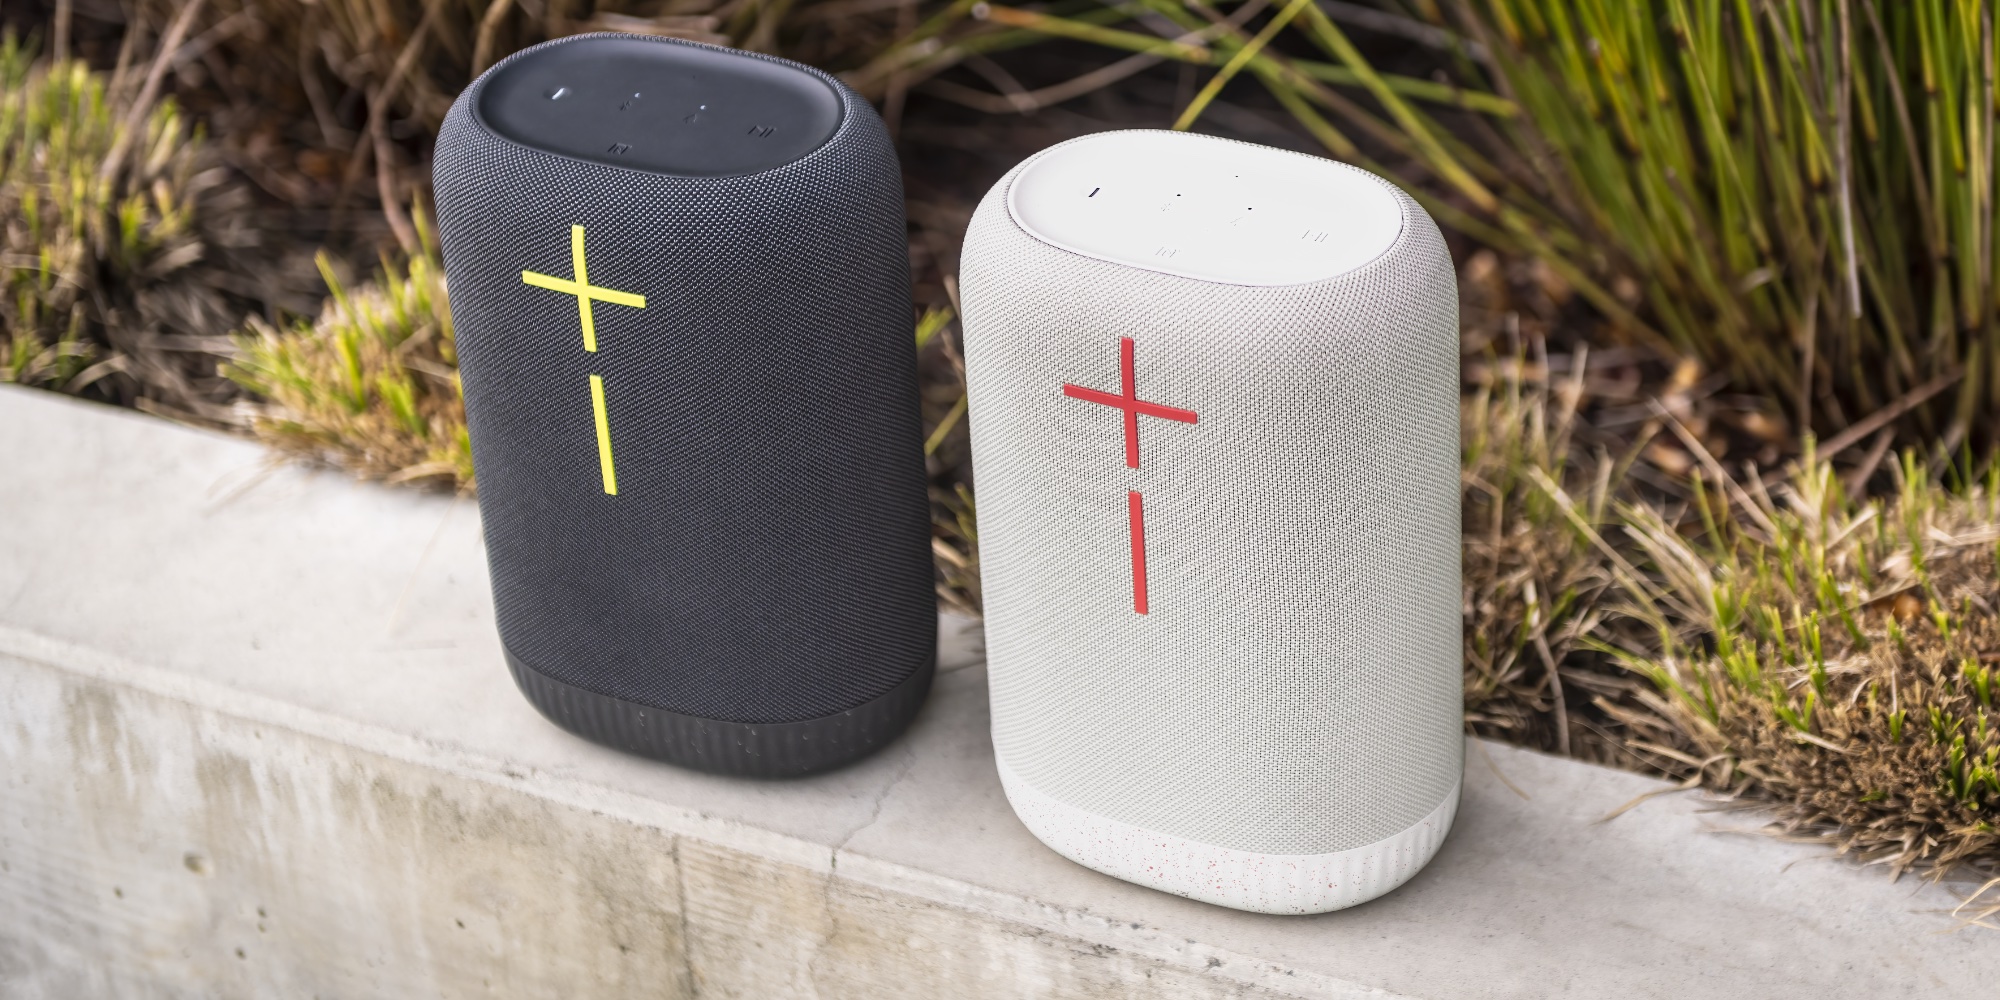 Ultimate Ears Epicboom Review: The Brand's Best Portable Speaker